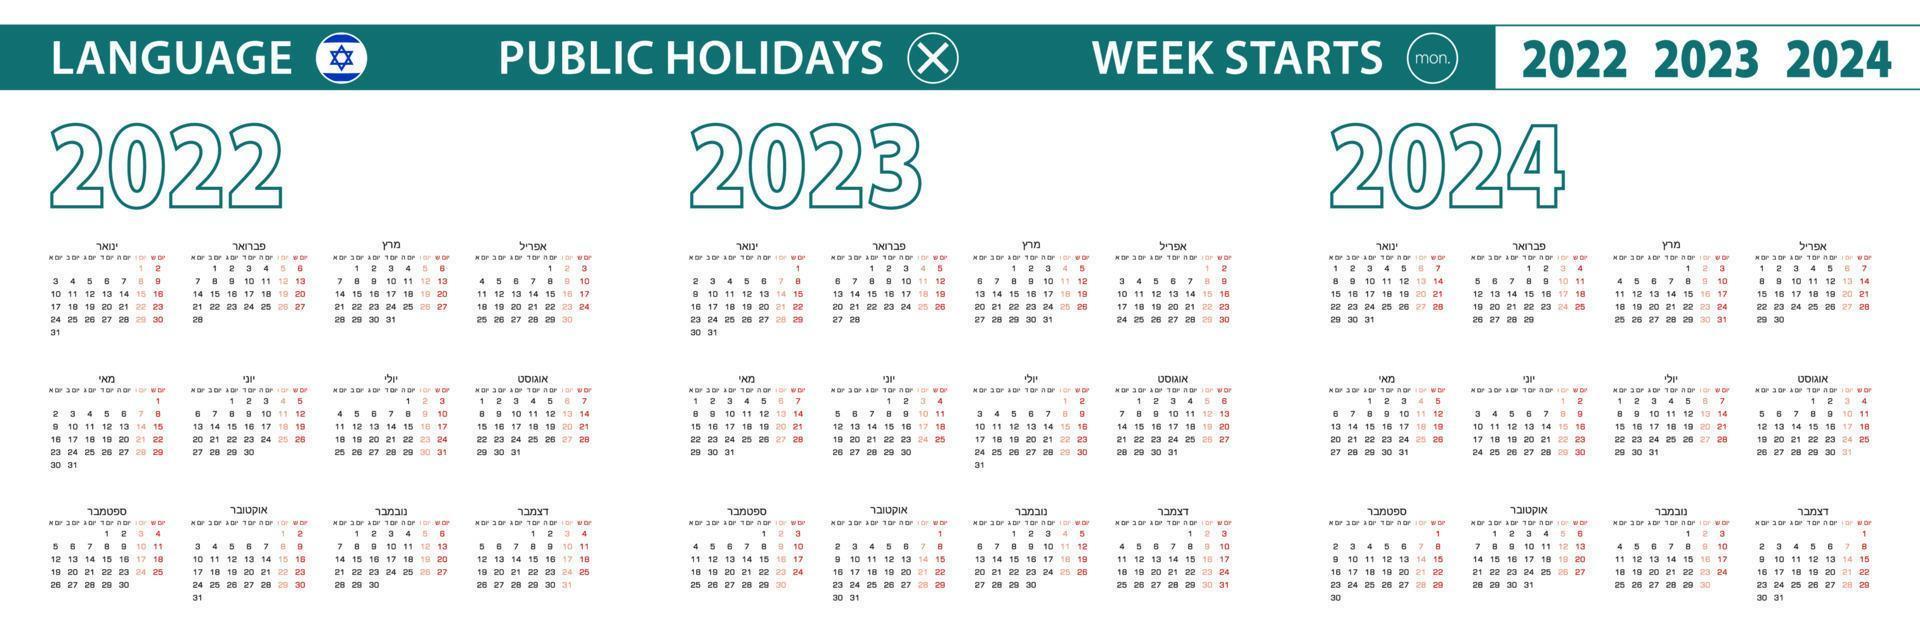 Simple calendar template in Hebrew for 2022, 2023, 2024 years. Week starts from Monday. vector